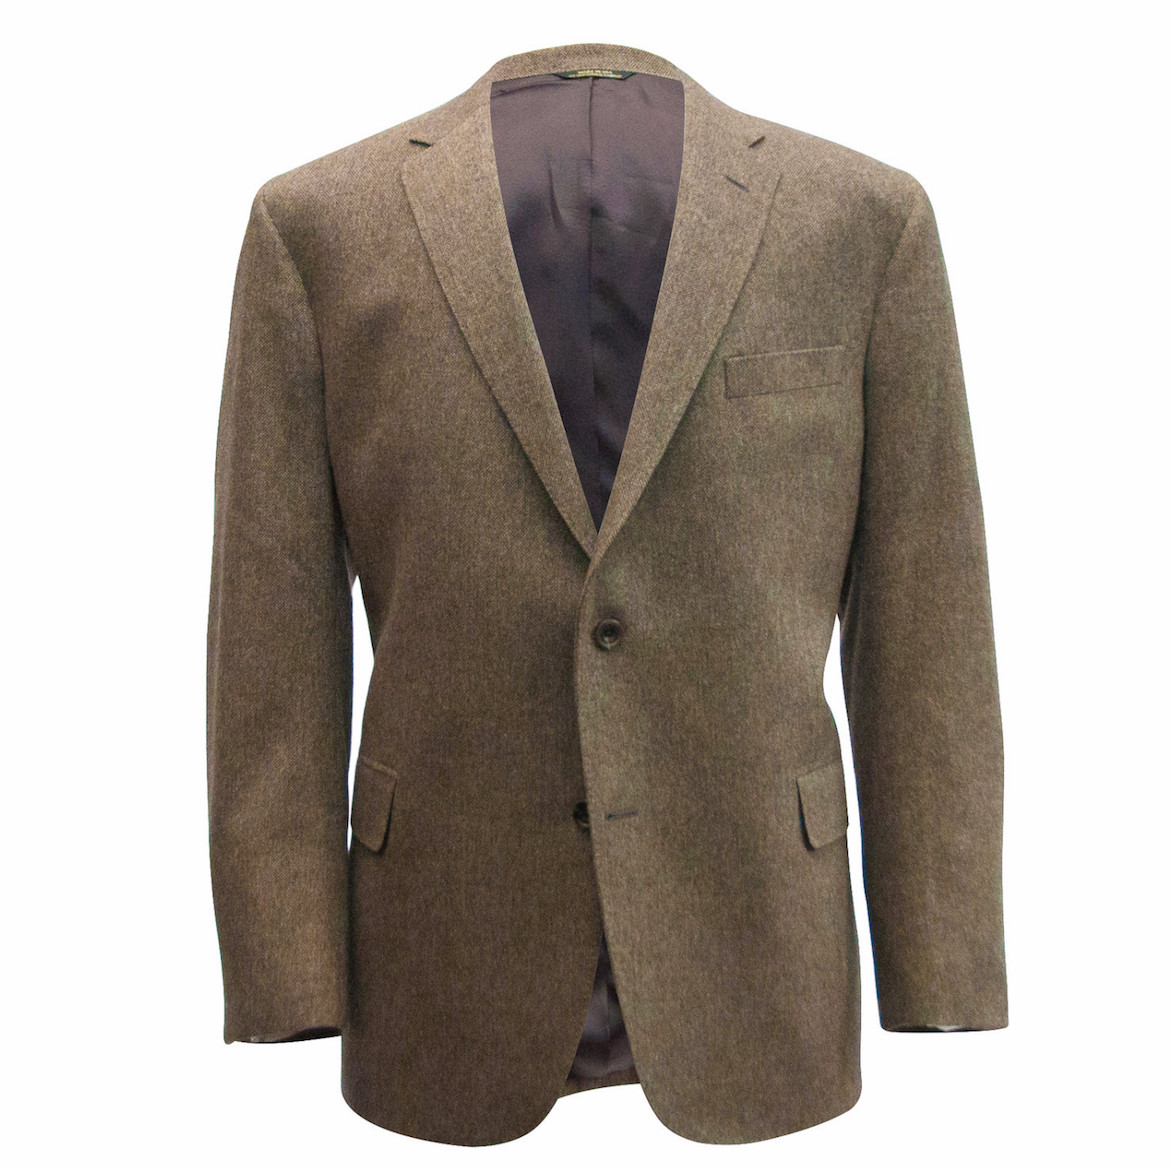 Gift this: Brown Tweed Sport Coat from Ole Mason Jar - QC Exclusive